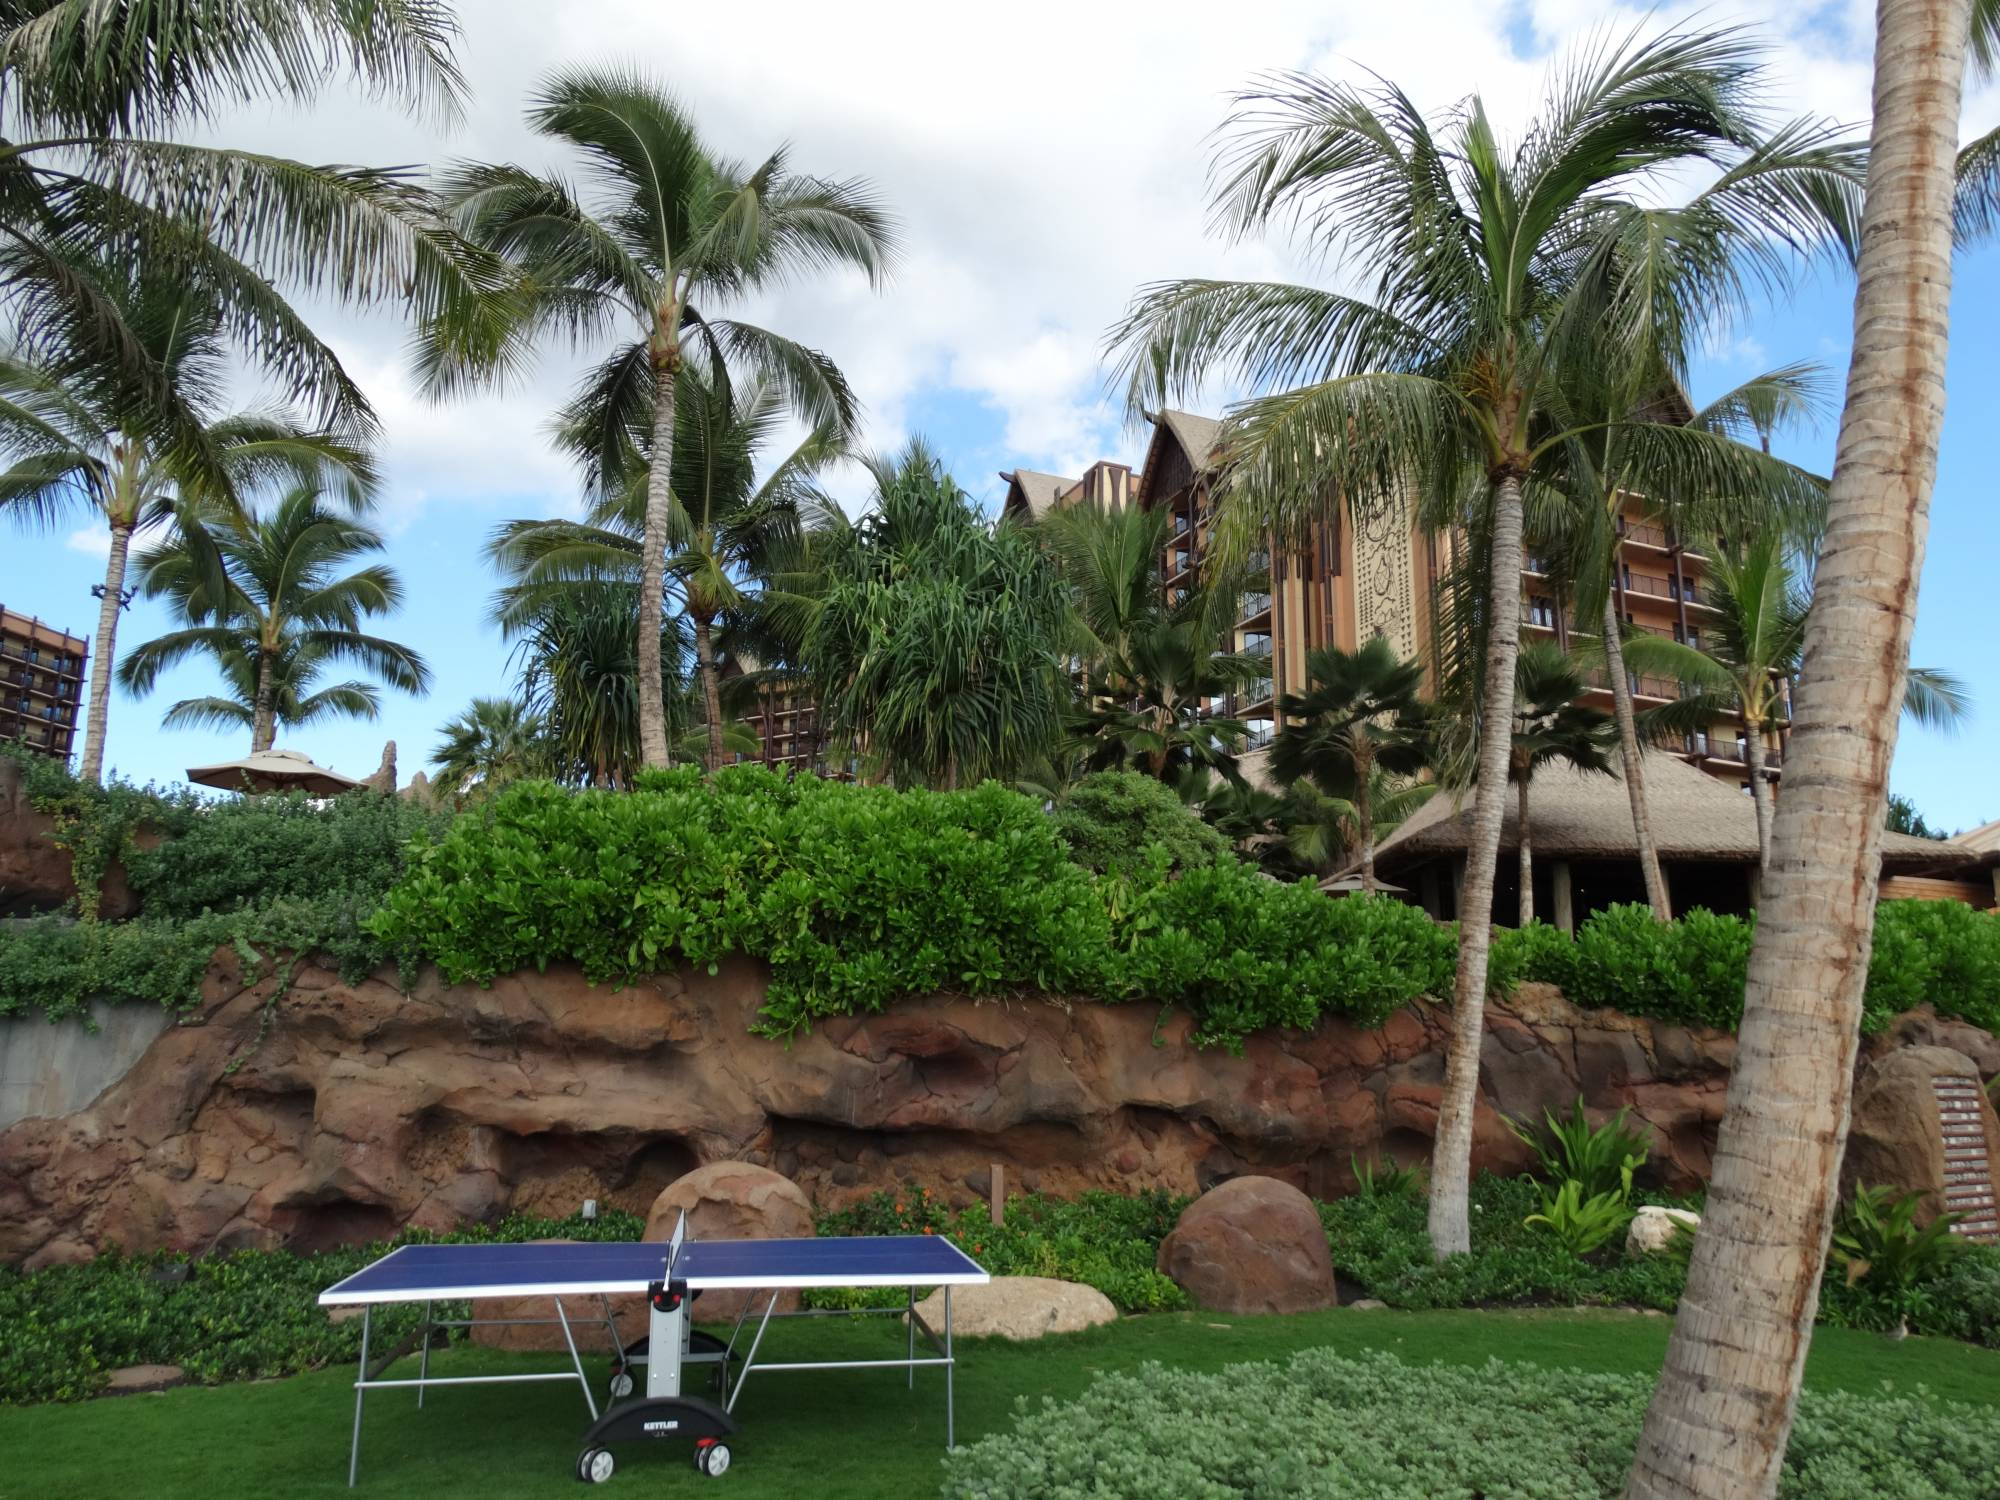 Aulani - as seen from the beach